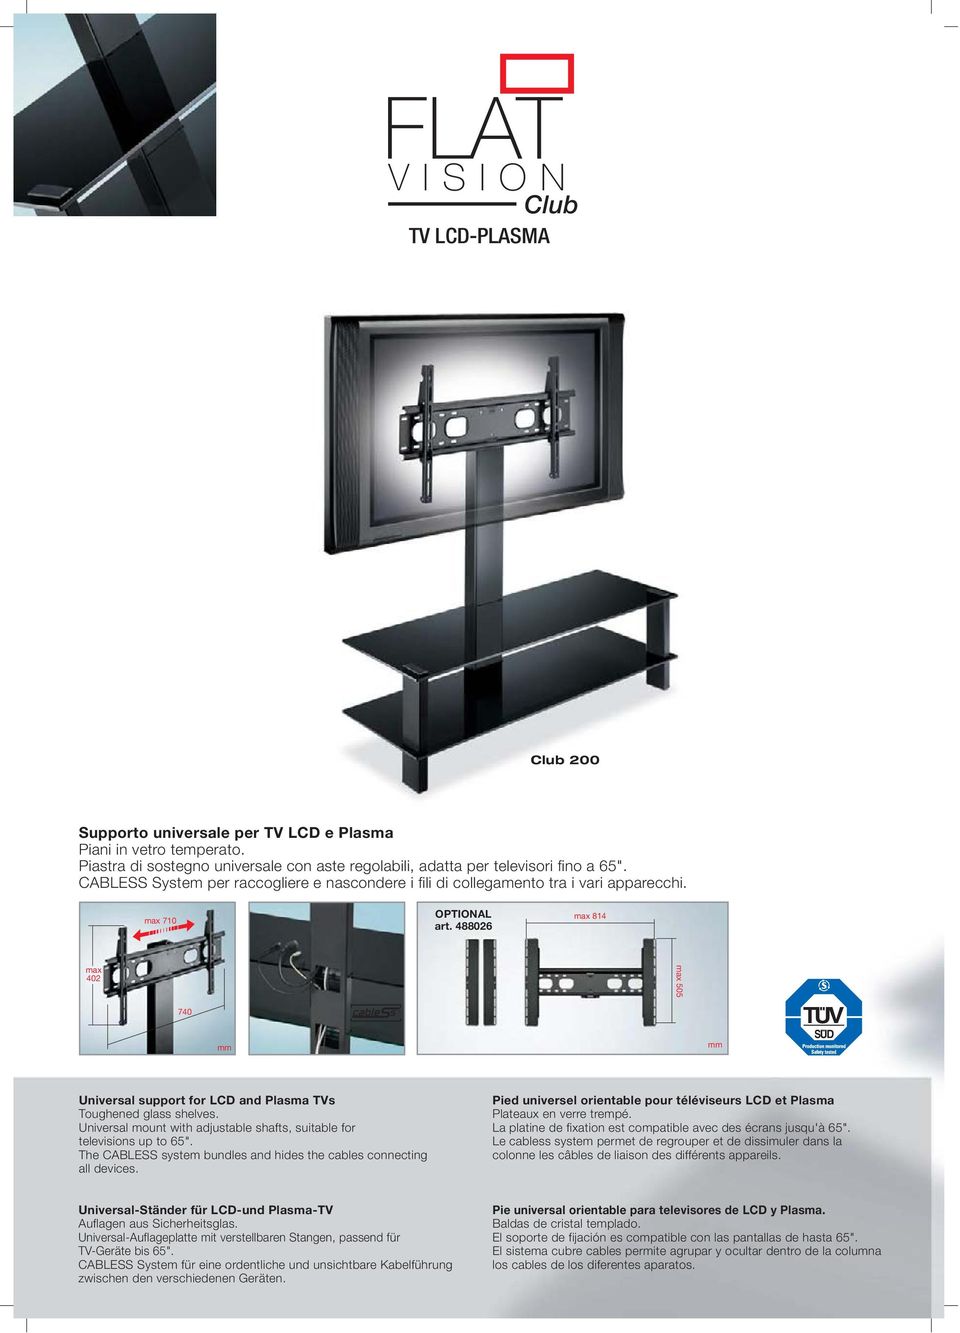 488026 max 814 max 402 740 mm max 505 mm TUV SUD Universal support for LCD and Plasma TVs Toughened glass shelves. Universal mount with adjustable shafts, suitable for televisions up to 65".